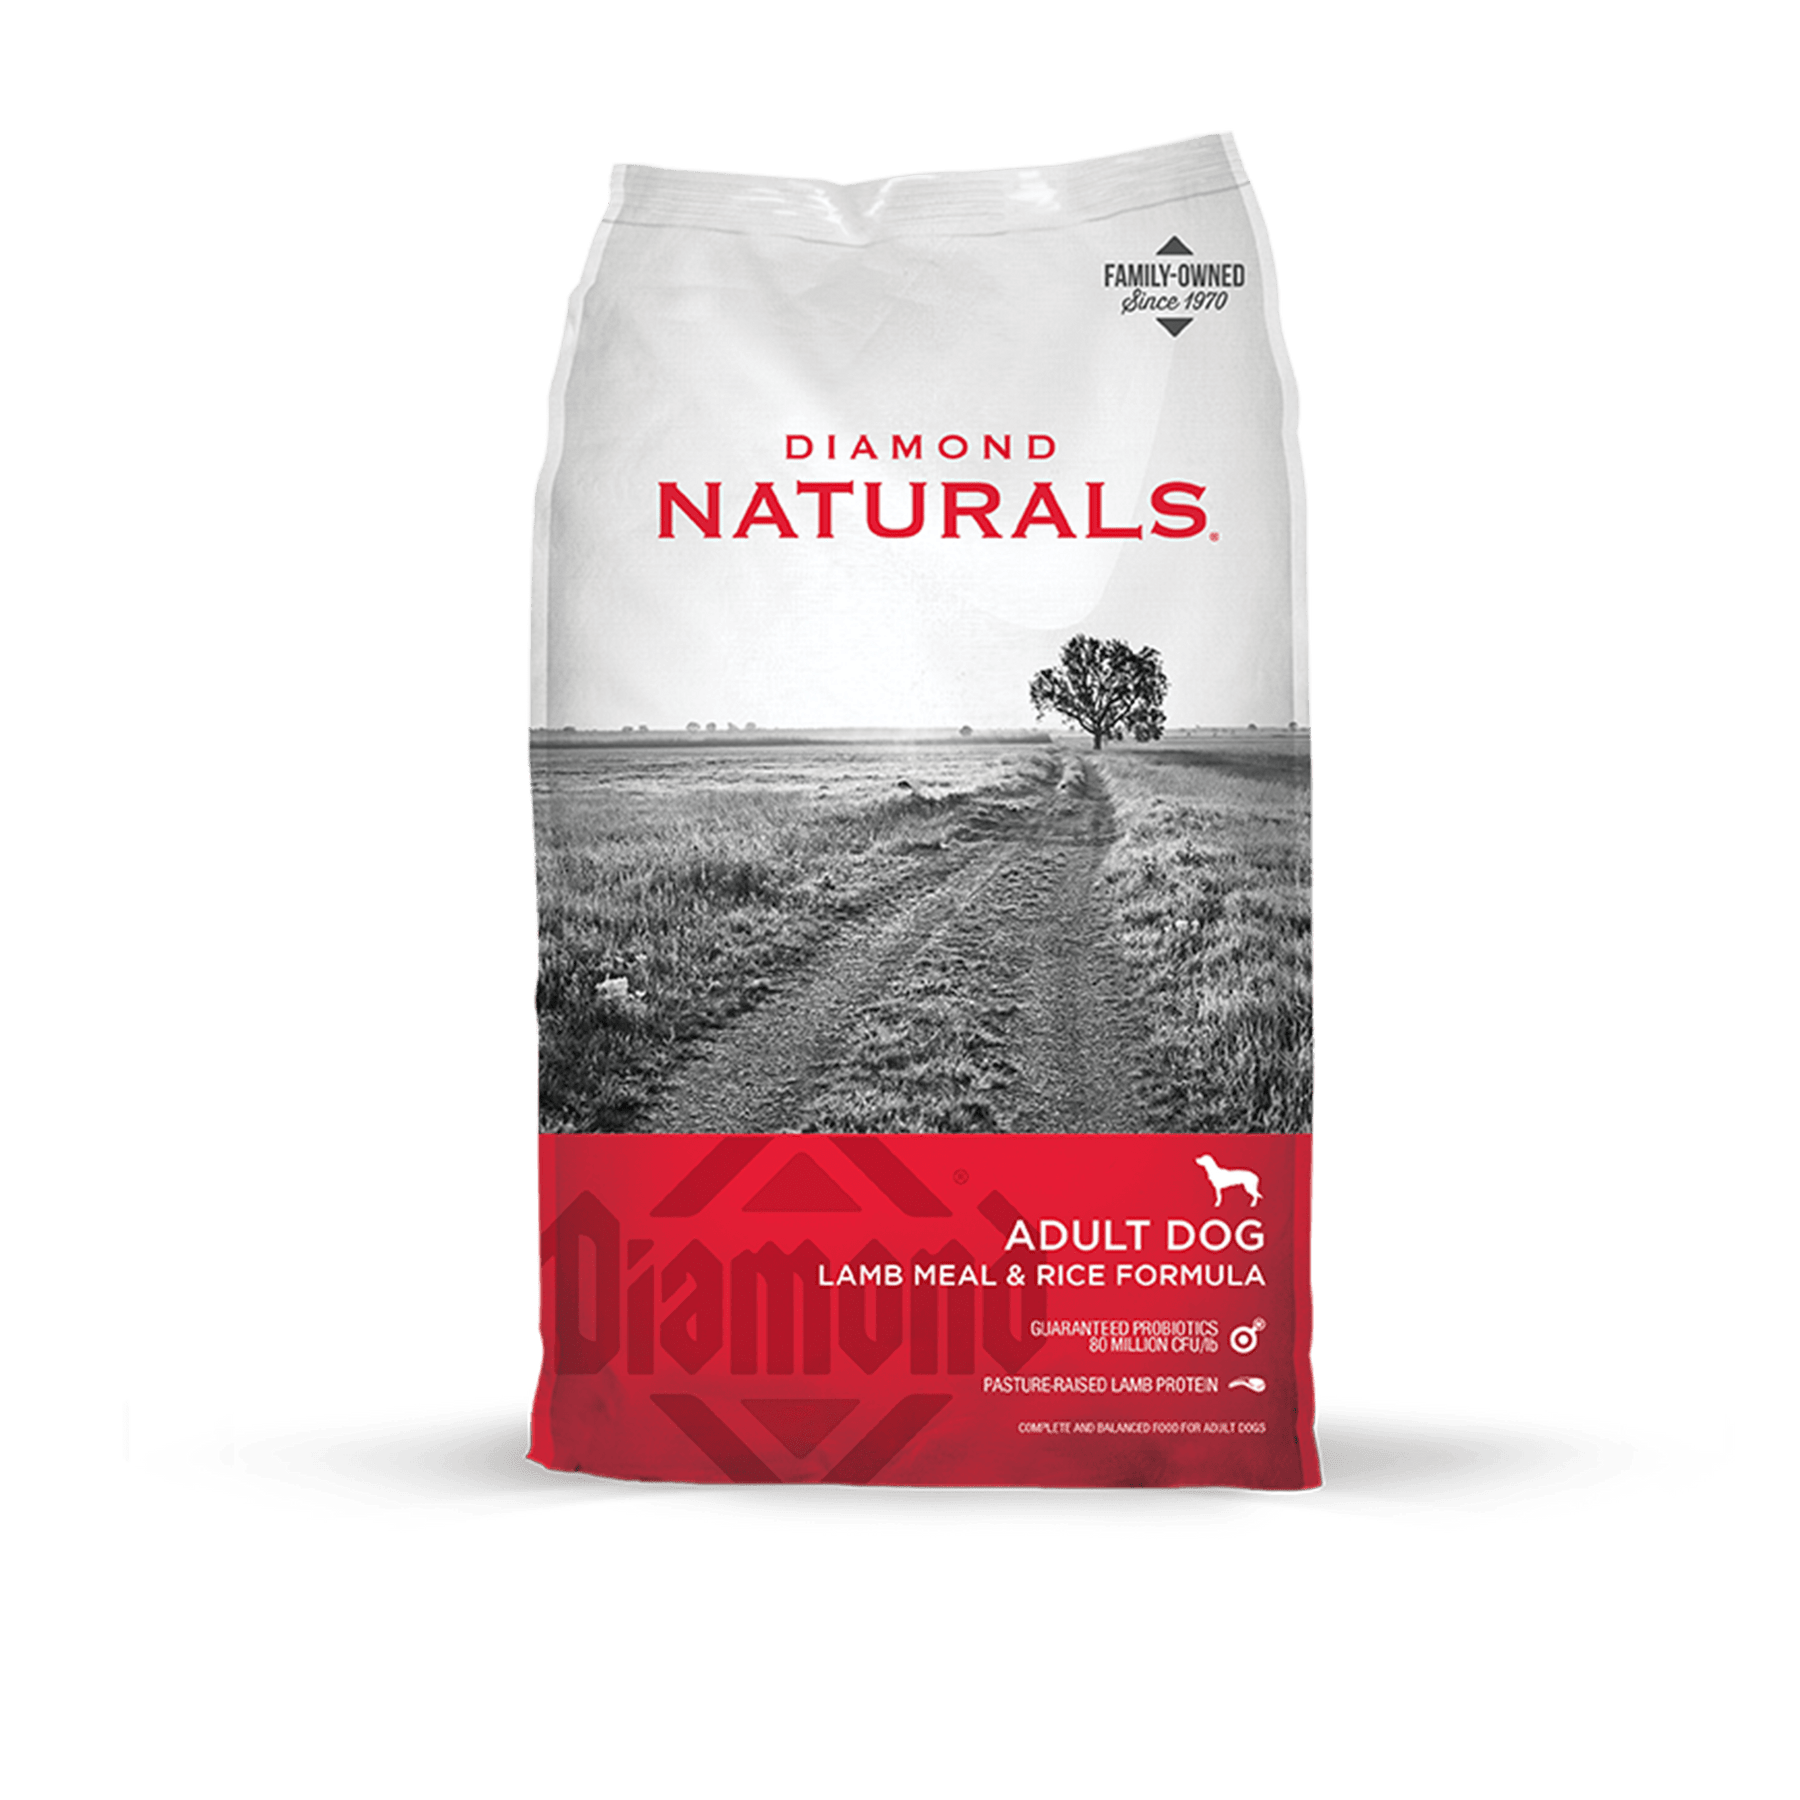 Diamond Naturals - Adult Dog Lamb Meal & Rice Formula Dry Dog Food-Southern Agriculture